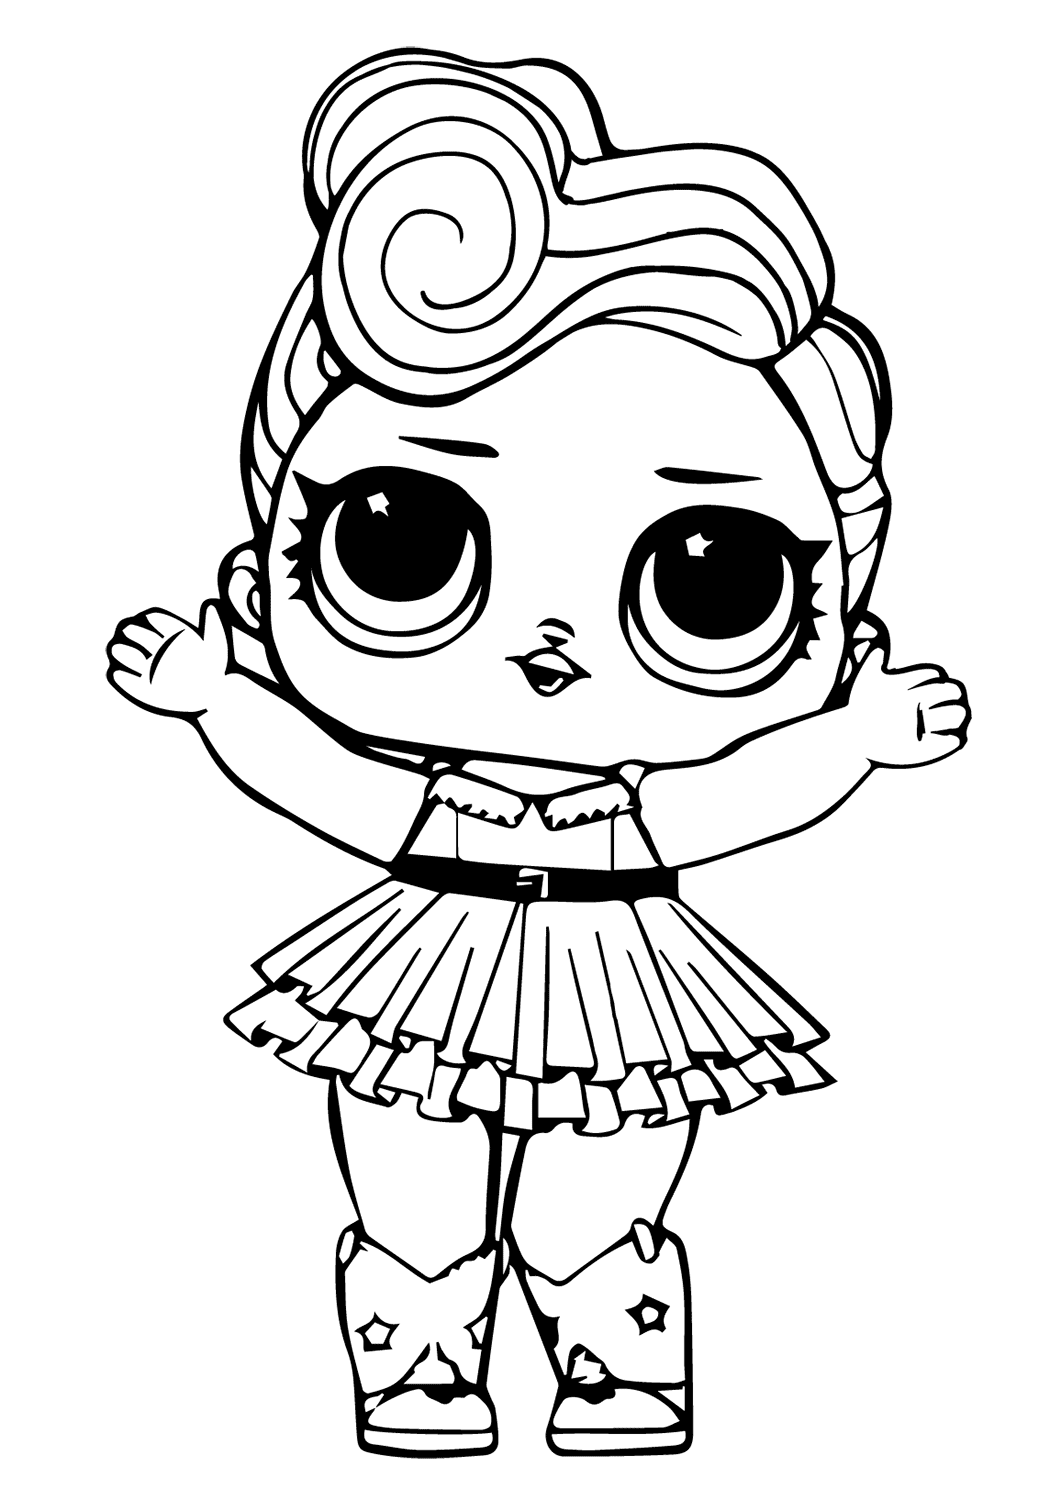 Luxe Lol Doll Coloring Page   Free Printable Coloring Pages for Kids